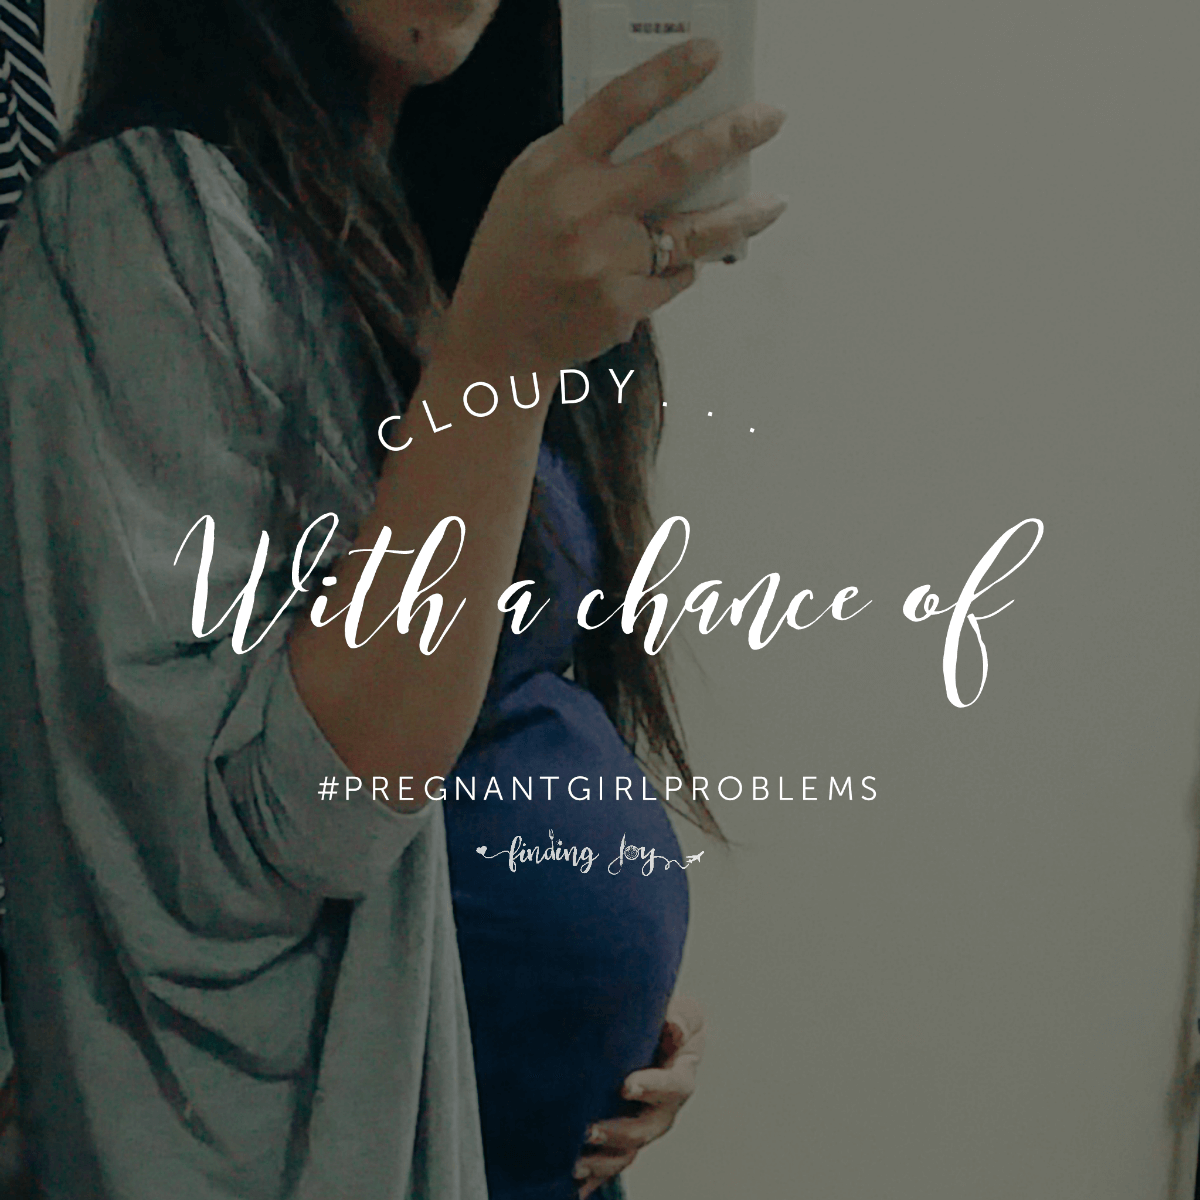 Cloudy, with a chance of #pregnantgirlproblems : one woman's journey through the shittiness of pregnancy.